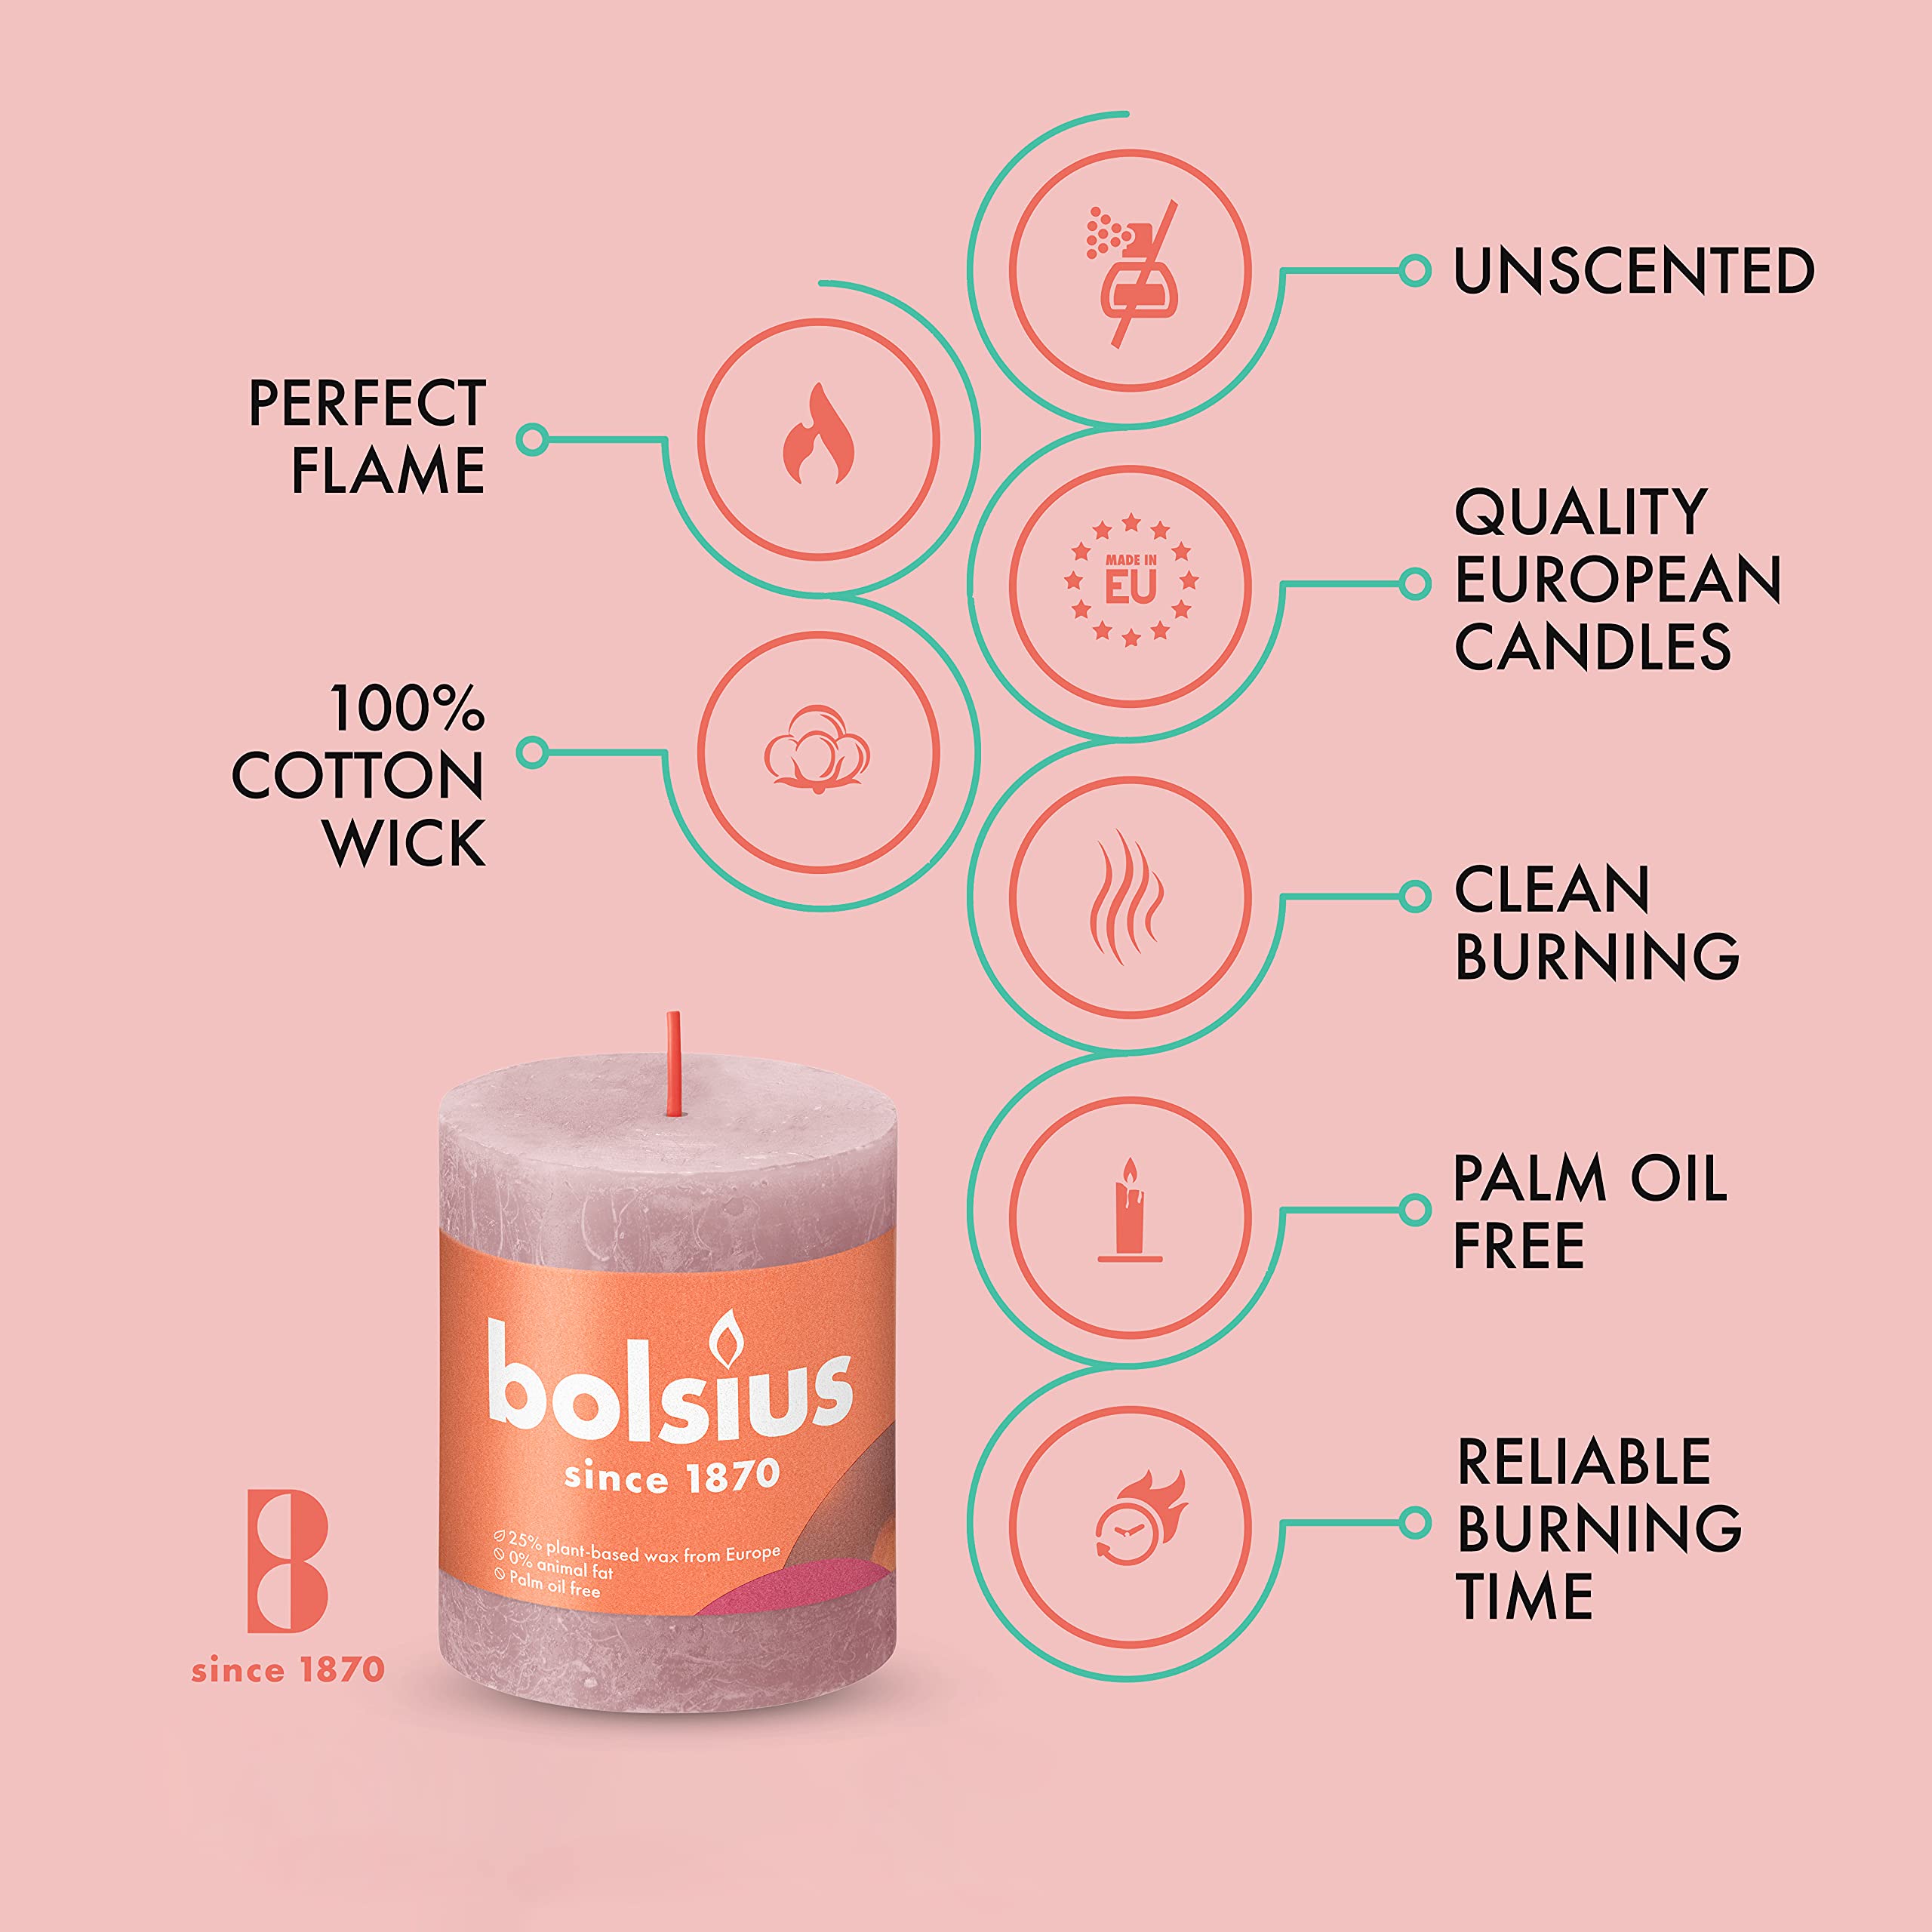 BOLSIUS 4 Pack Ash Rose Rustic Pillar Candles - 2.75 X 3.25 Inches - Premium European Quality - Includes Natural Plant-Based Wax - Unscented Dripless Smokeless 35 Hour Party and Wedding Candles  - Like New